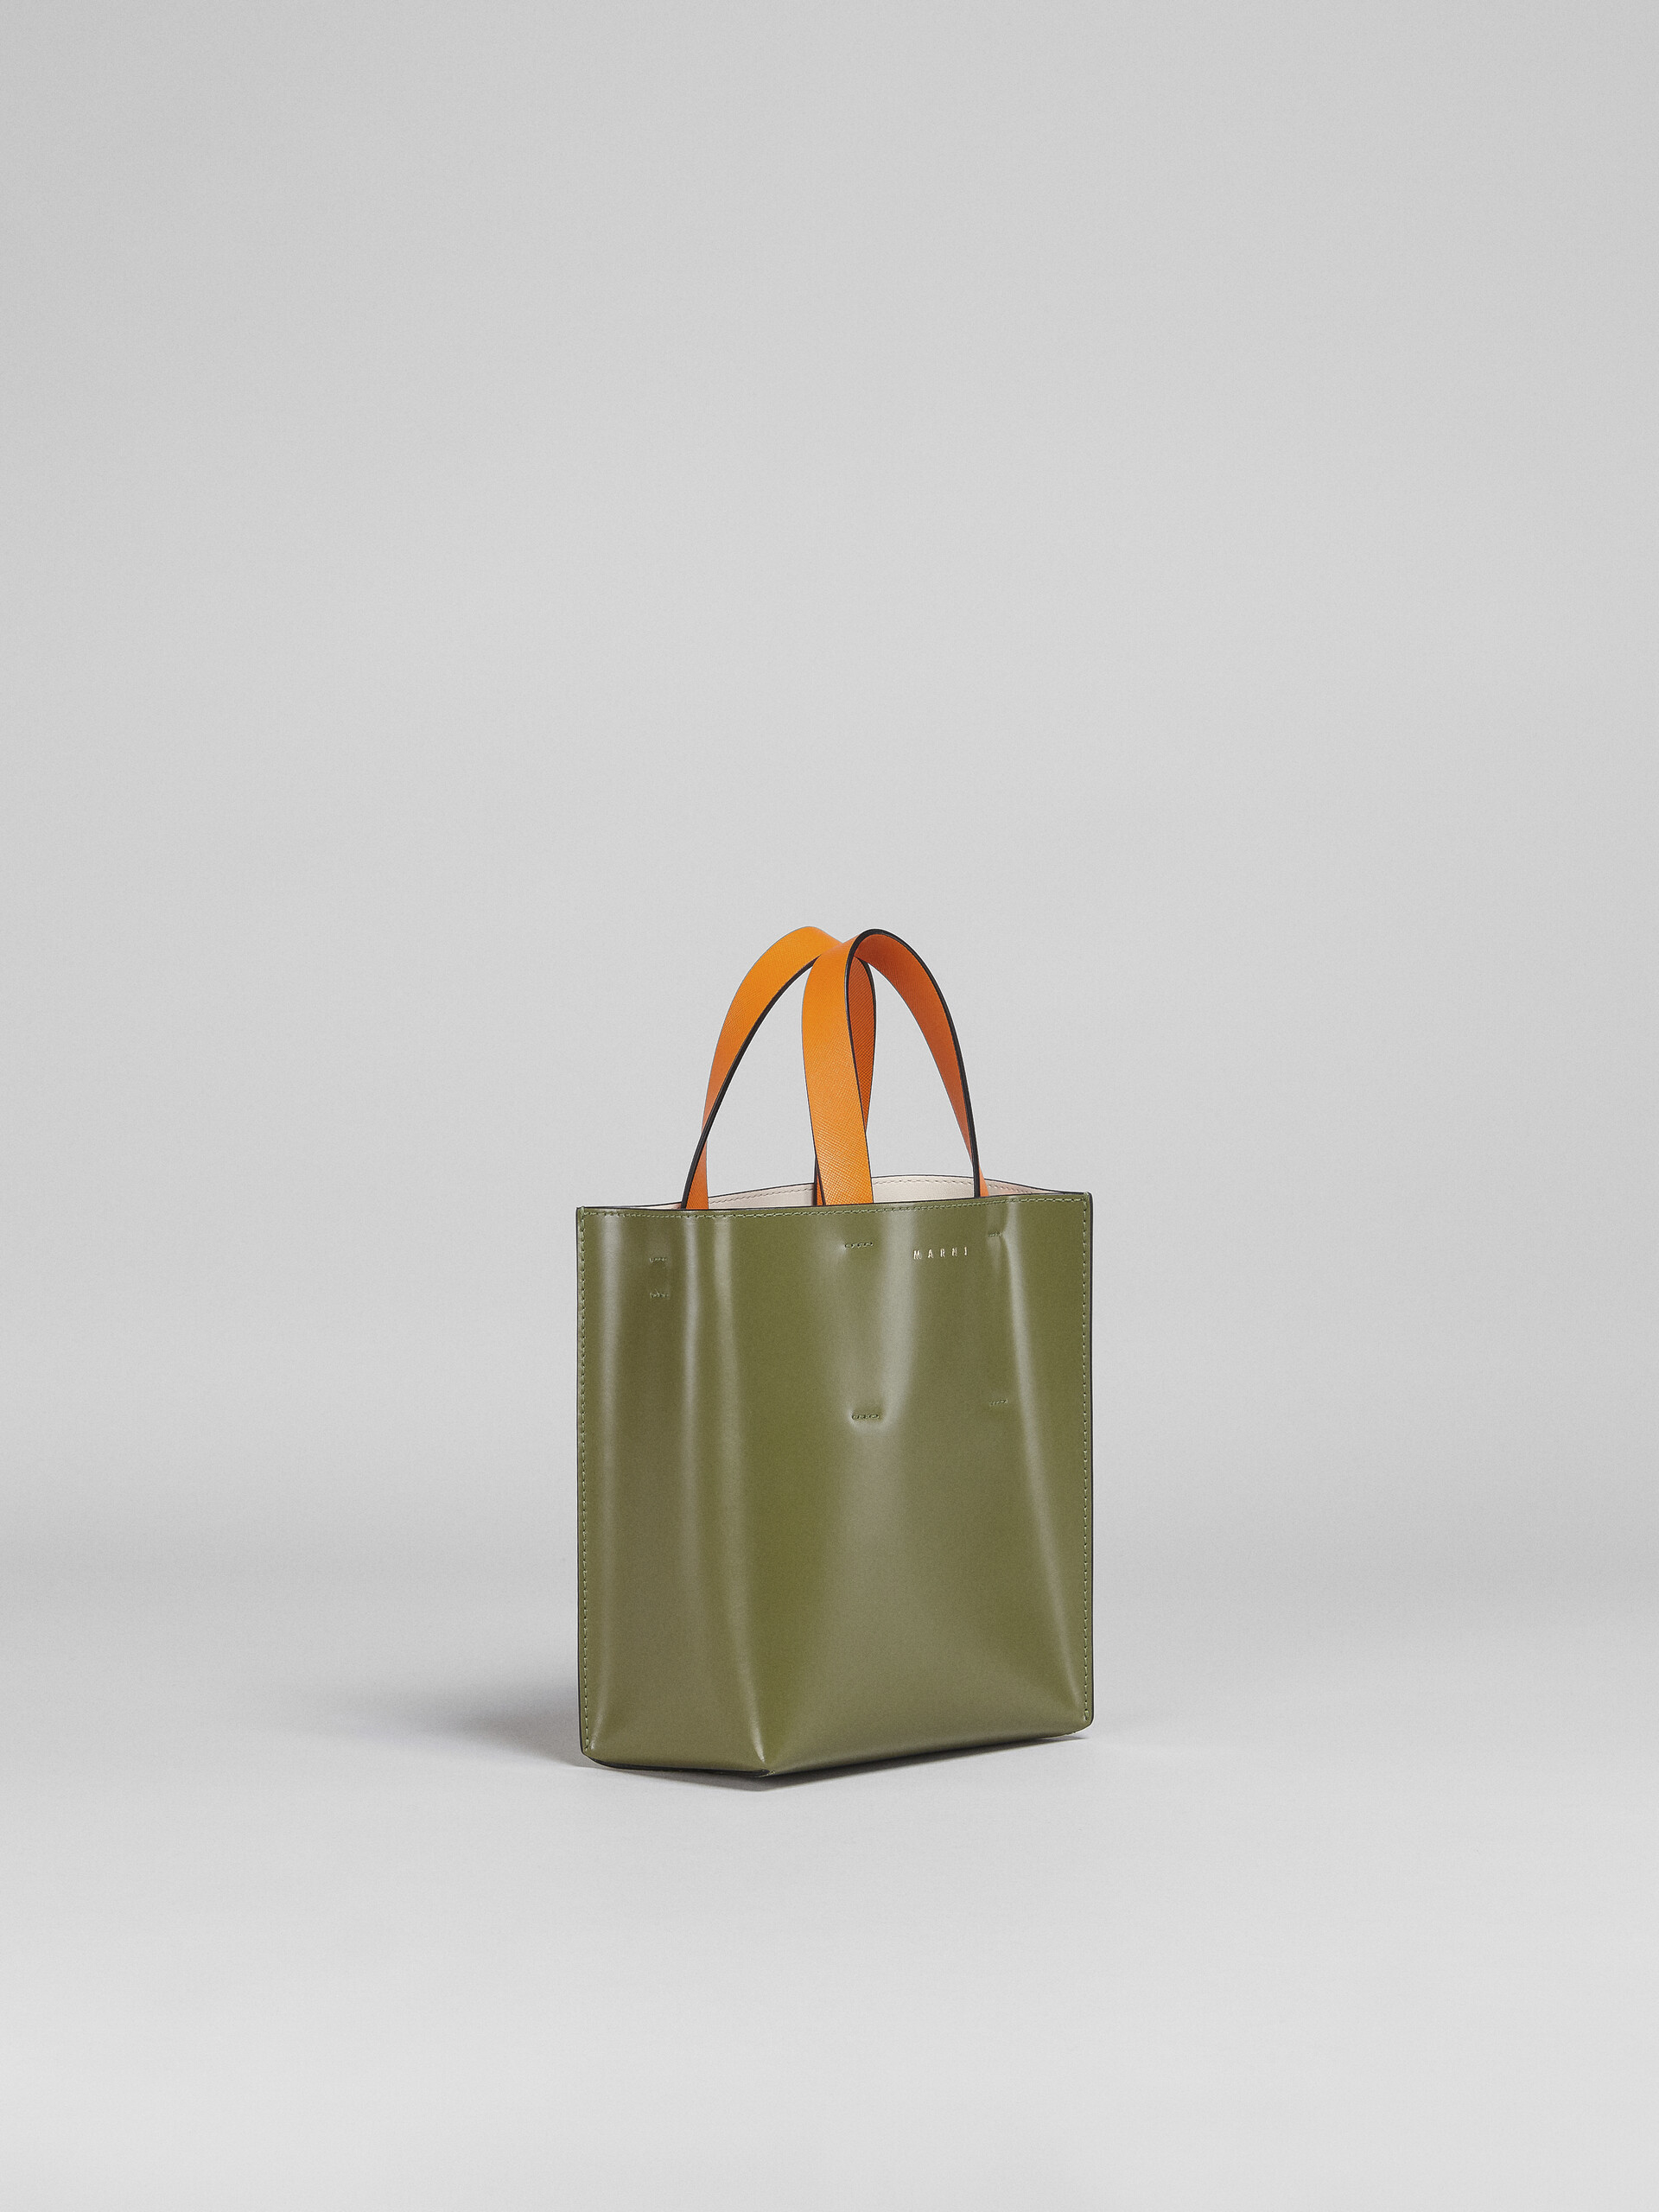 Green lime orange saffiano and polished leather MUSEO bag - Shopping Bags - Image 4